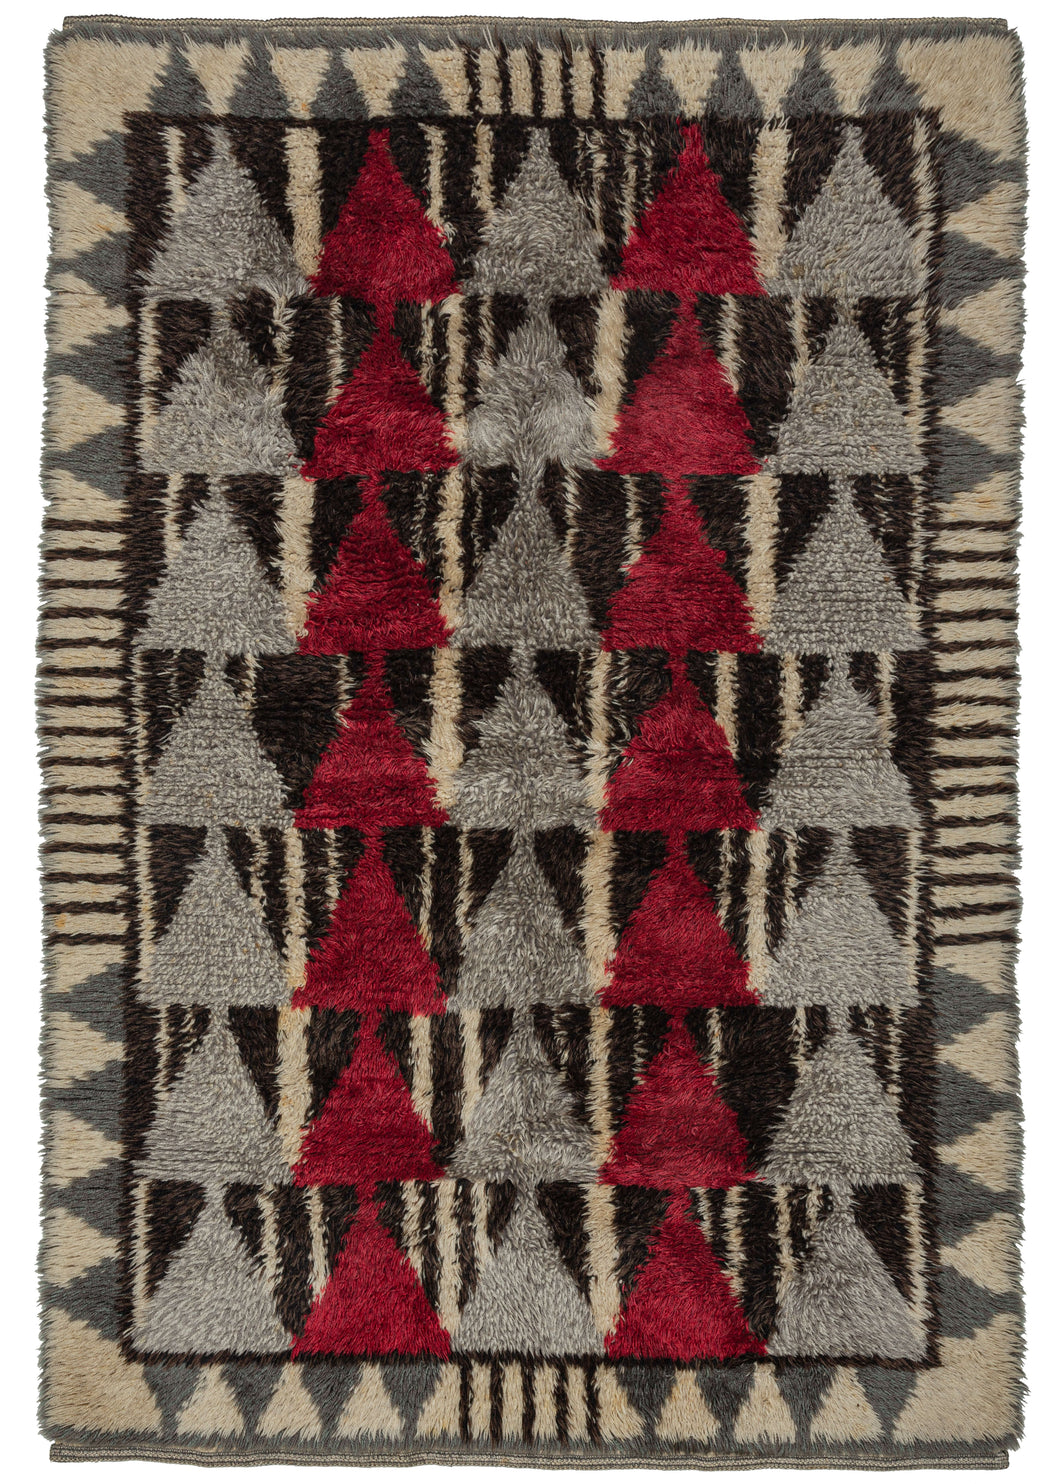 This Mid Century Rya Rug features a geometric design in black, white, red, and both gray and silver. The field is composed of alternating columns of red and silver triangles each stacked seven high against a ground of black and white wandering stripes. It is framed by a pattern of gray triangles and hash marks on a white ground. The geometric design mixed with the long shaggy pile gives a very modern feel.   In very good condition with minimal wear. Pile is shaggy, the handle is heavy but soft. 